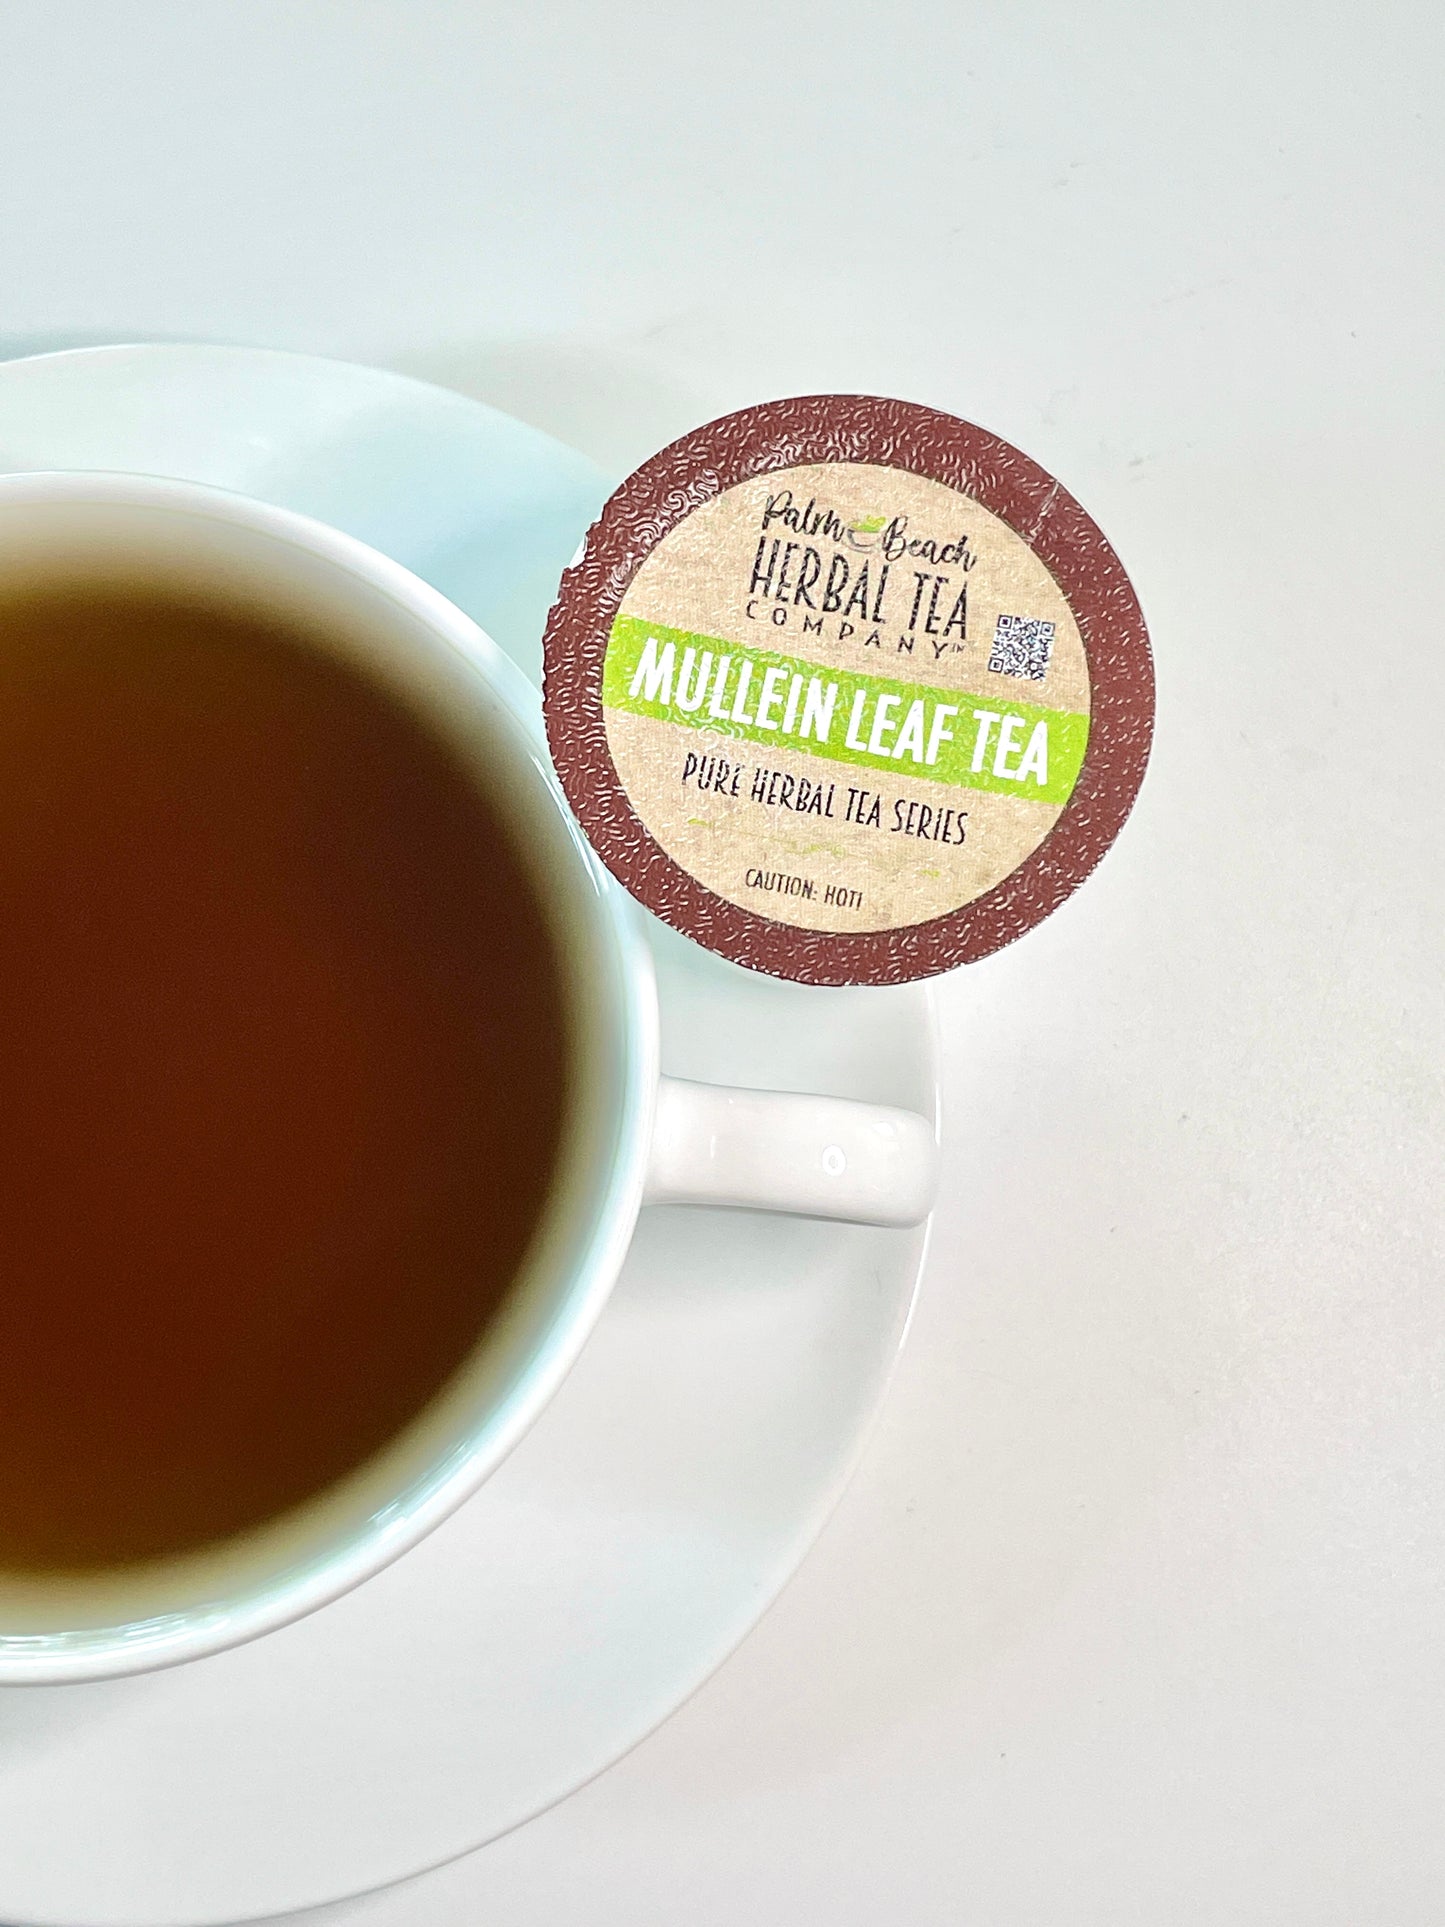 Mullein Leaf Tea T-CUP™ Herbal Tea Pods  | Single Cup Brew